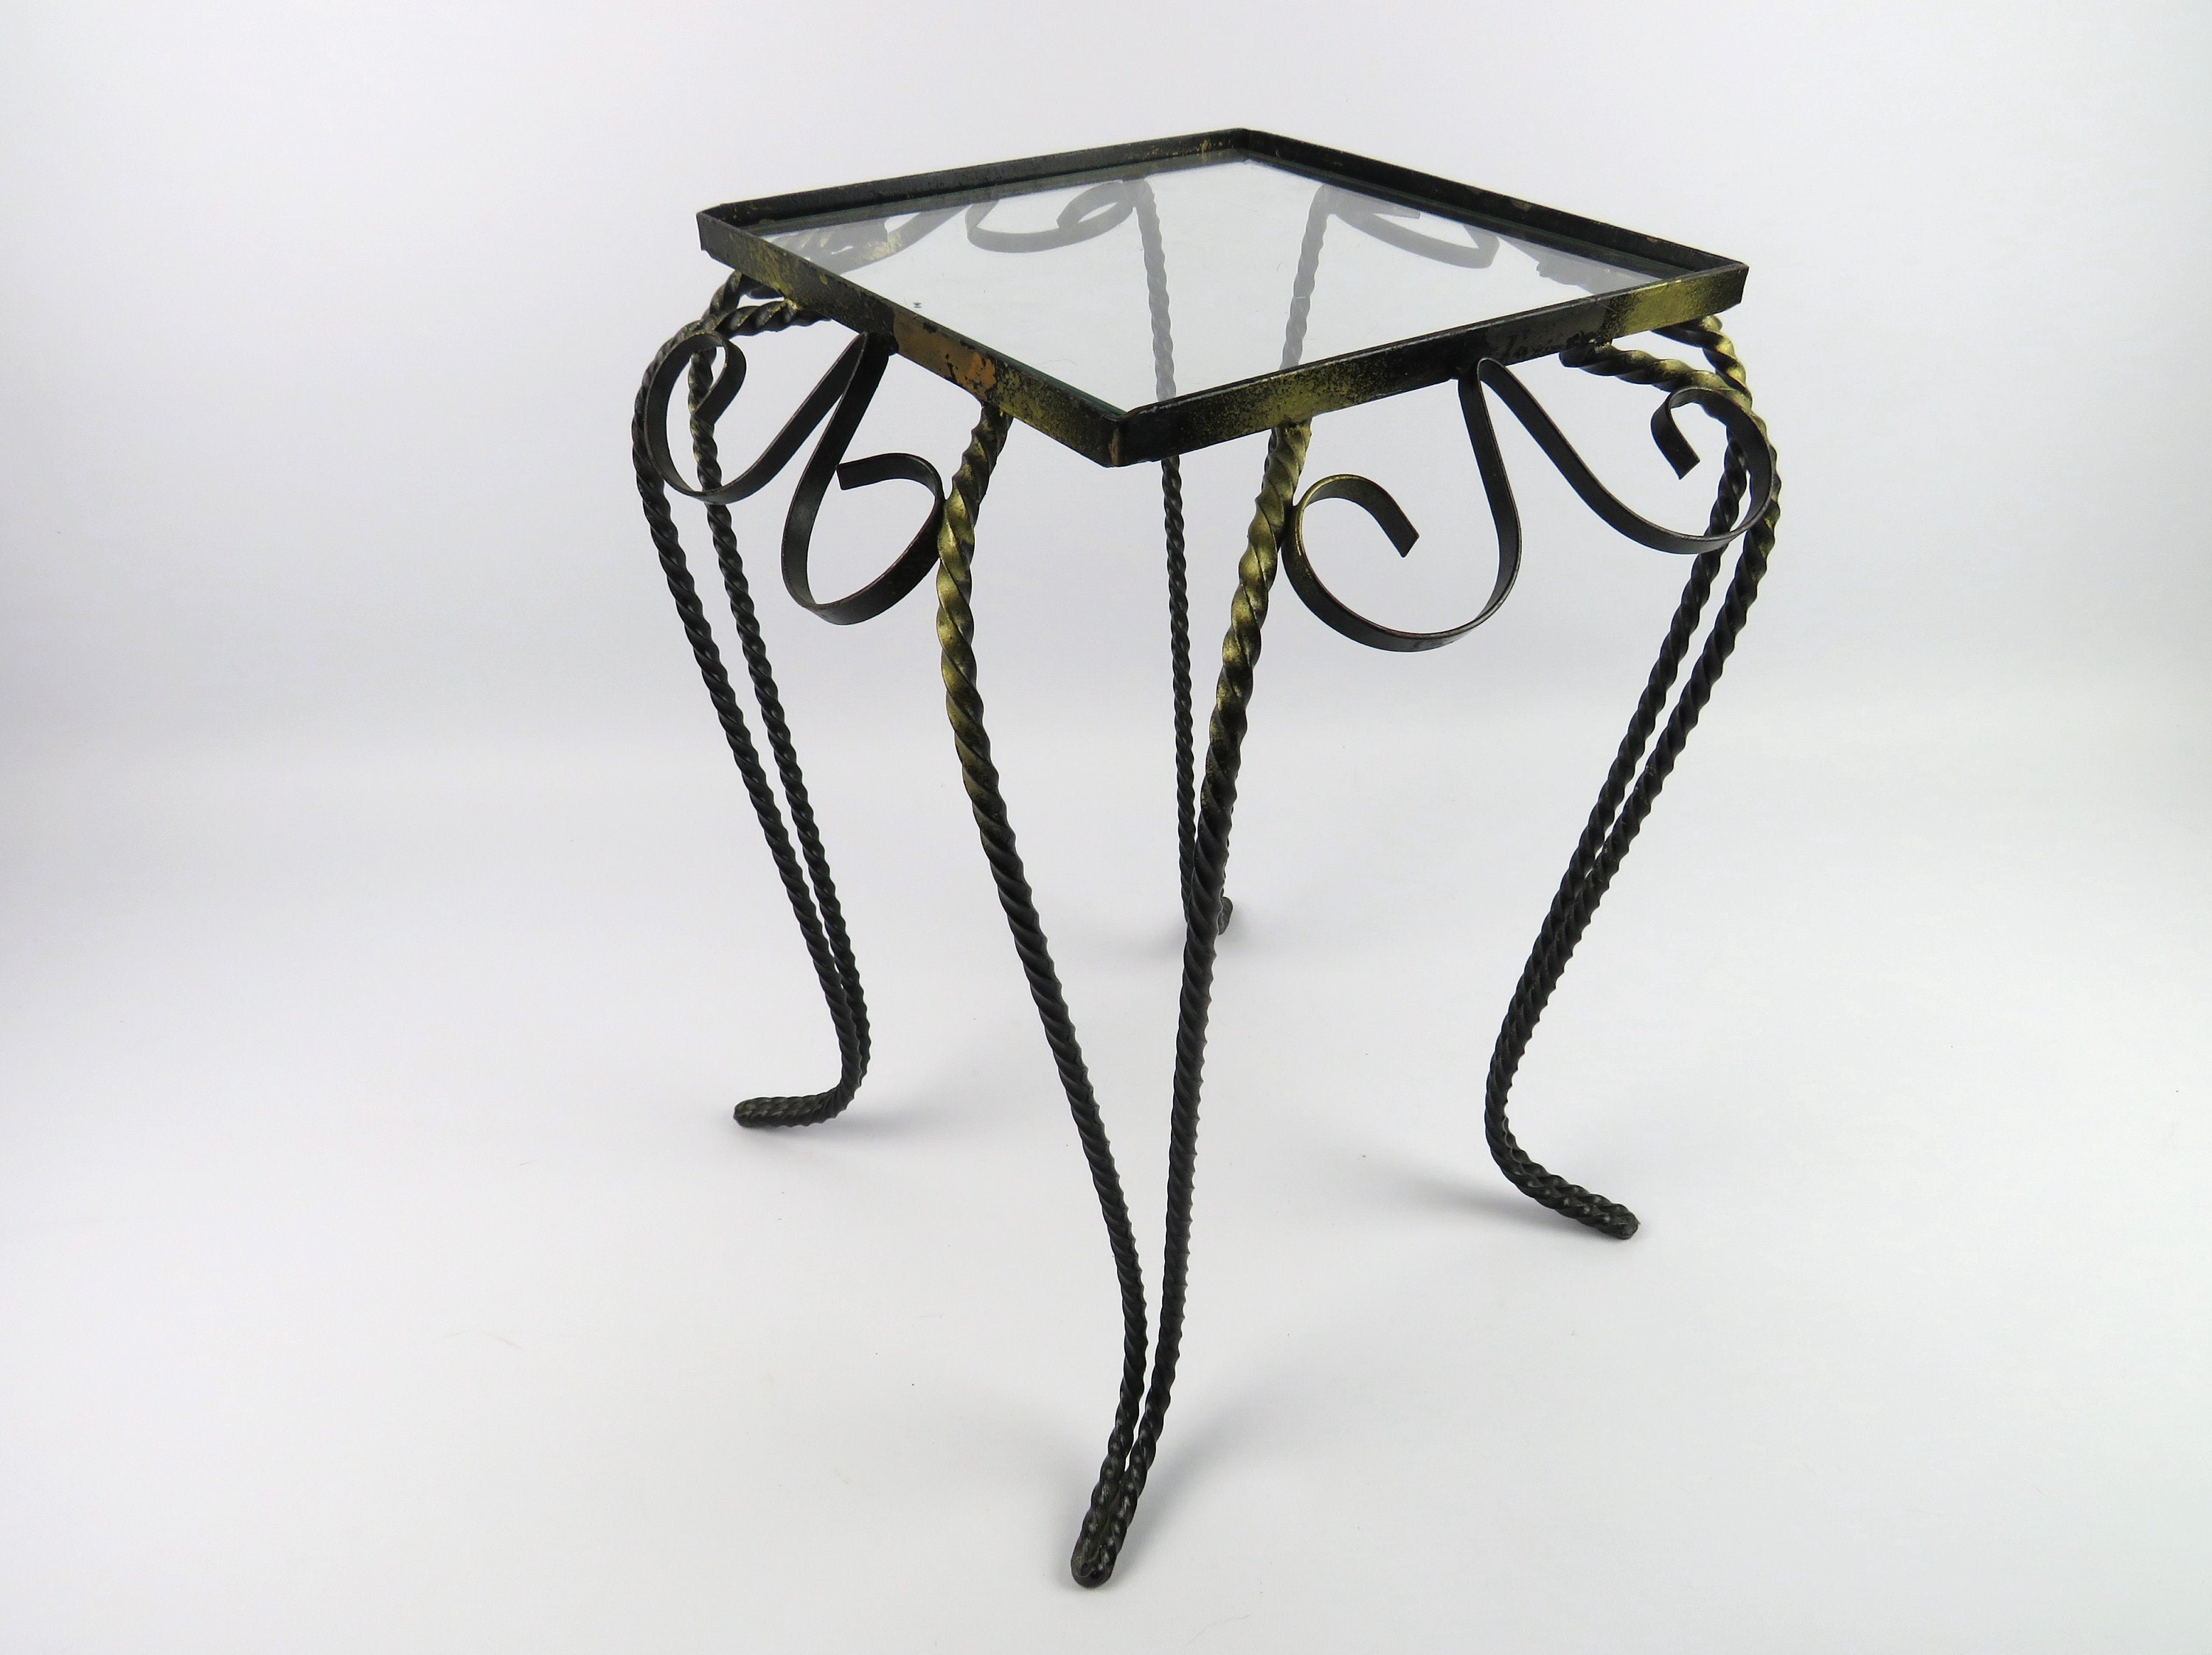 Petite Table D'appoint